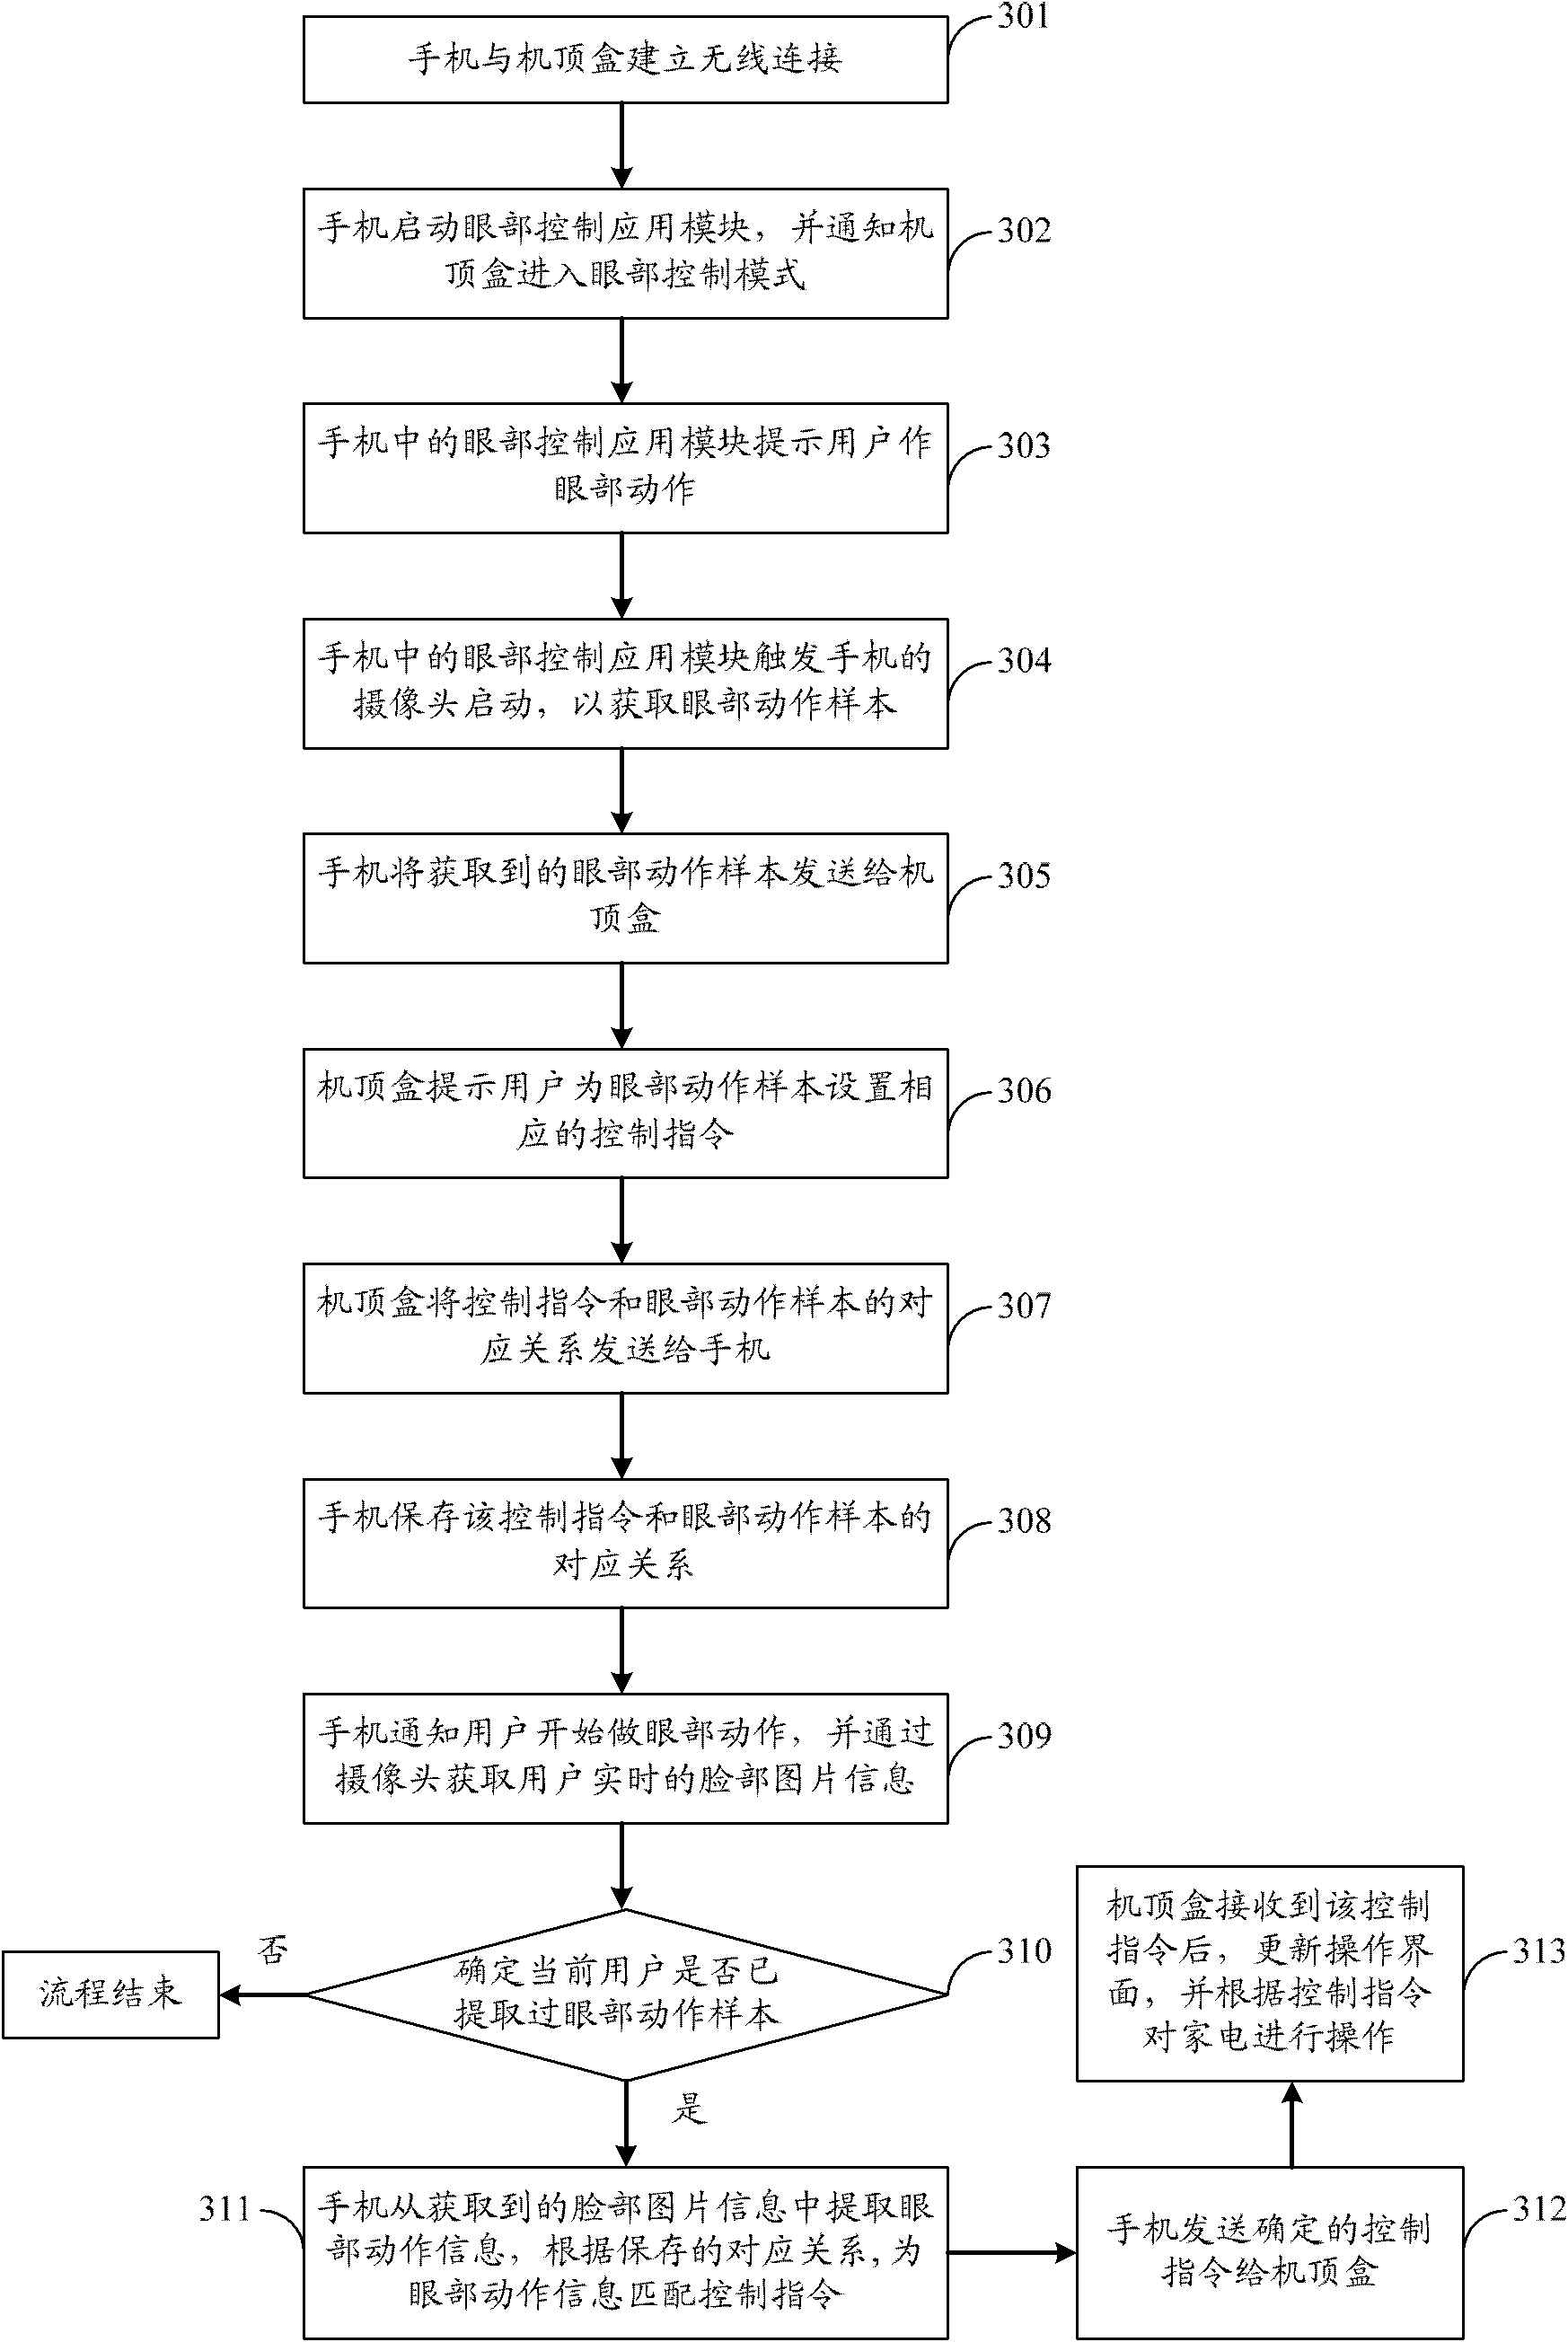 Method for controlling network terminal equipment, apparatus and system